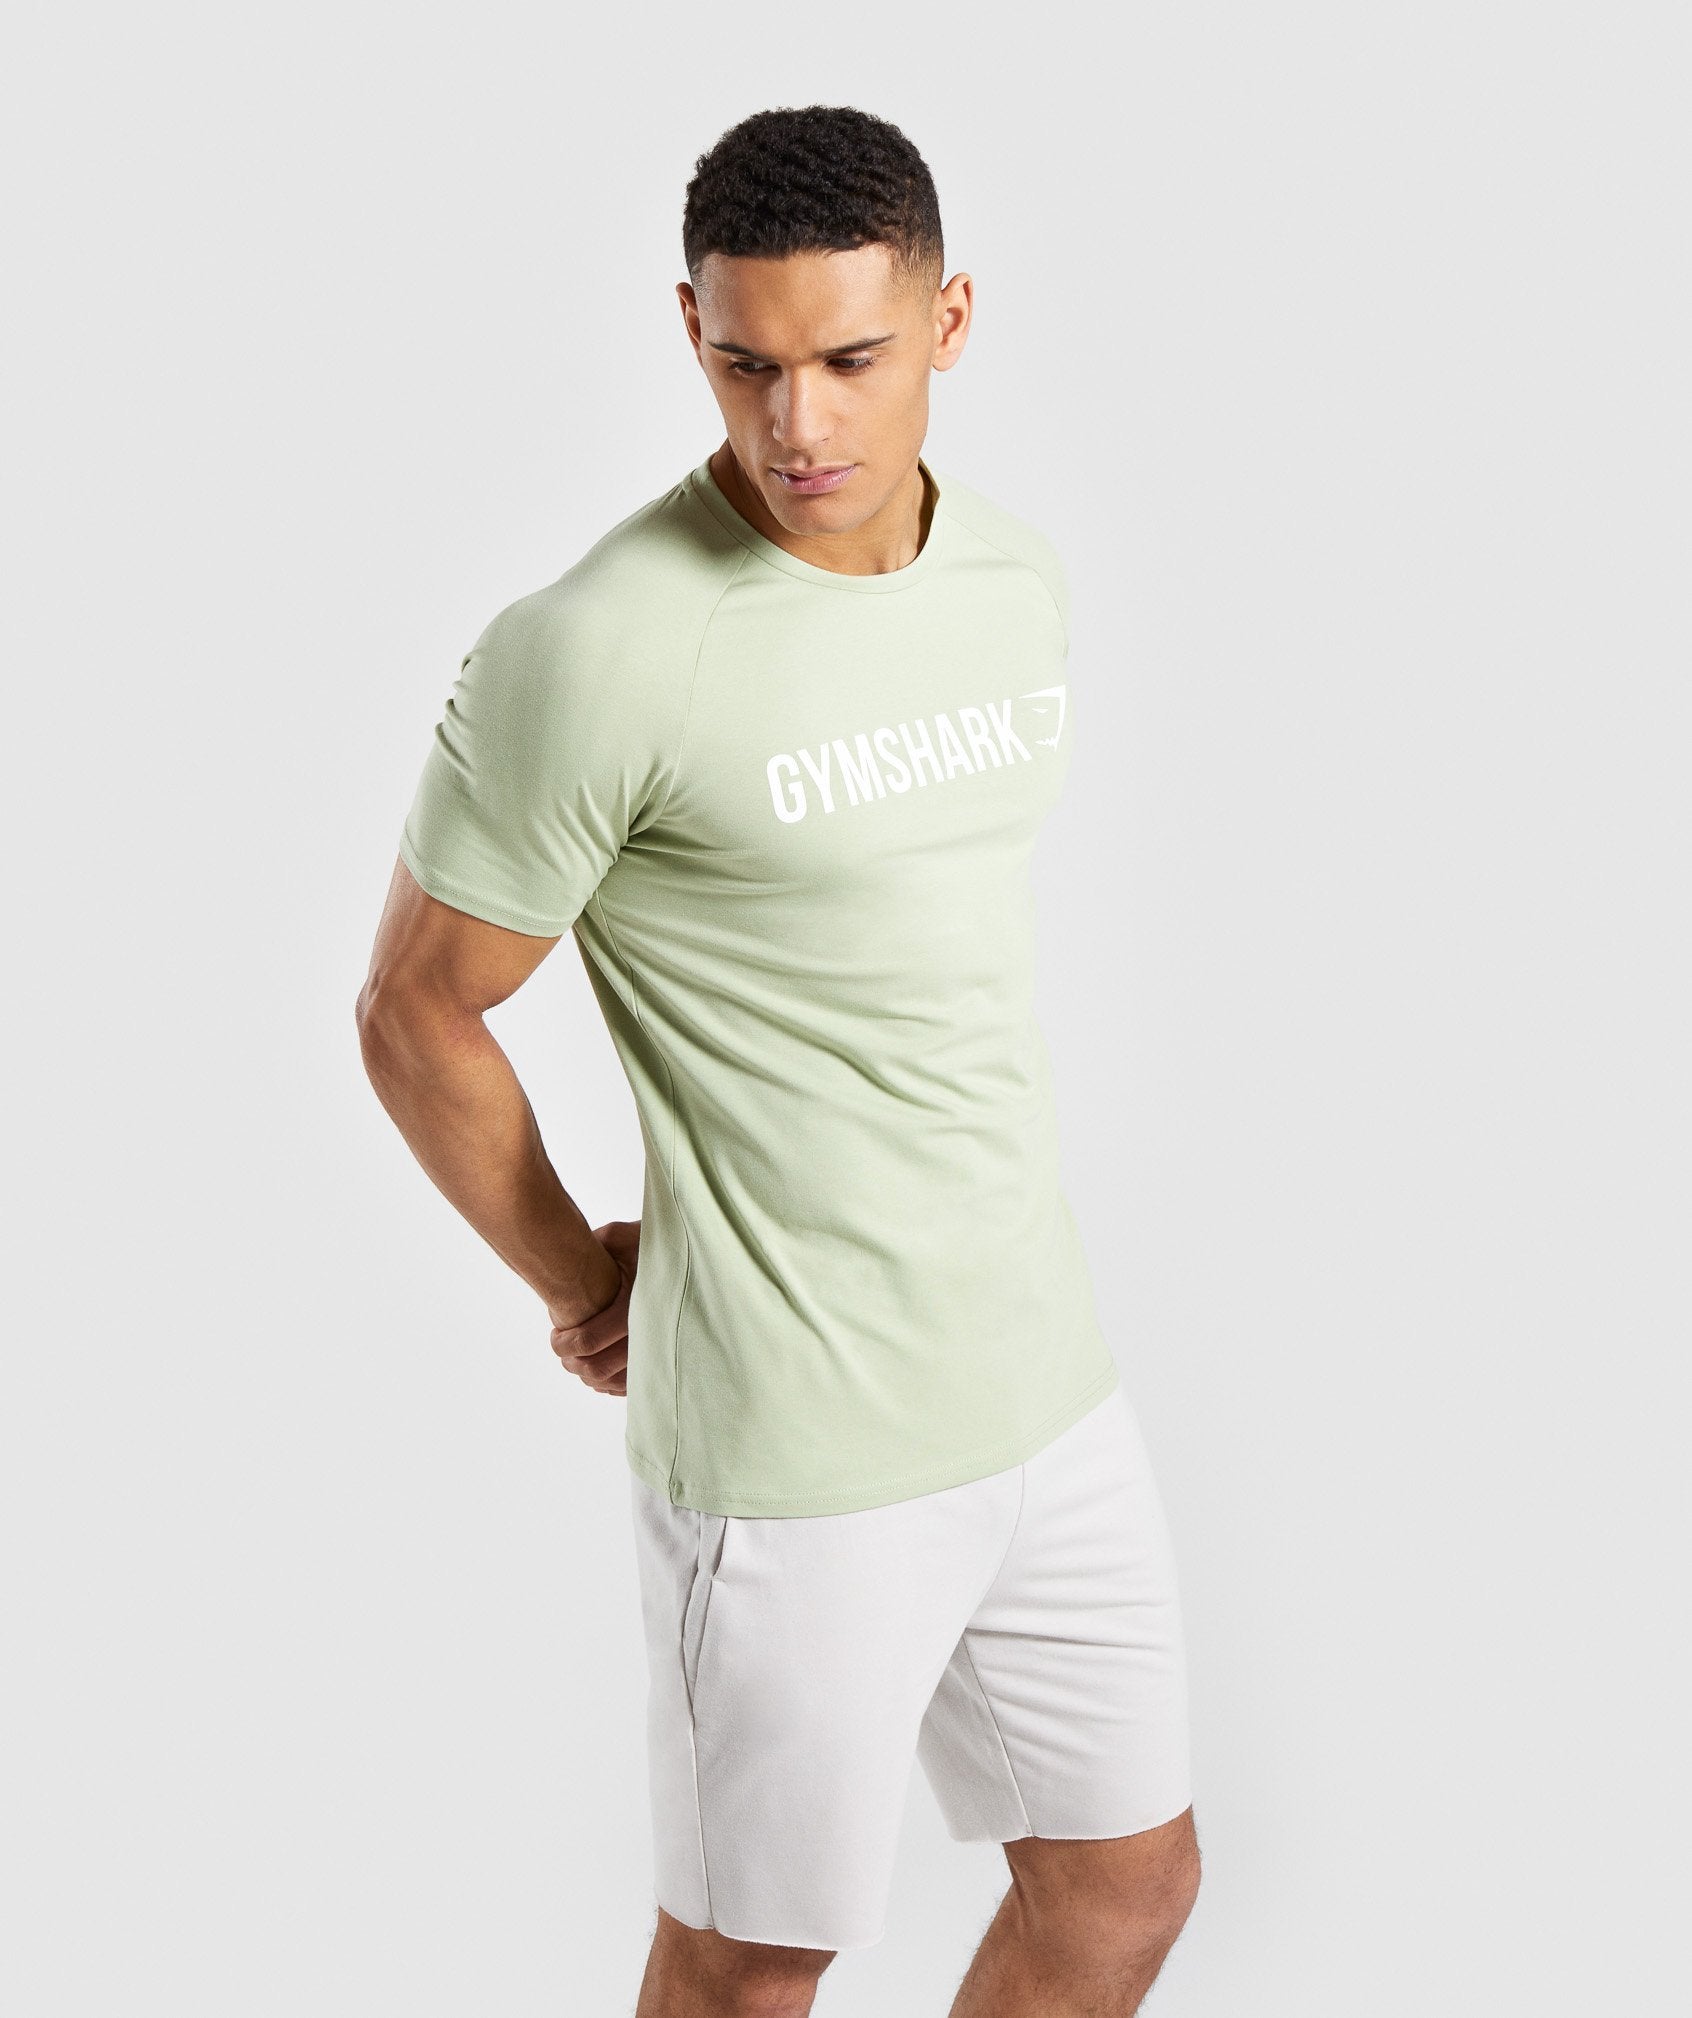 Apollo T-Shirt in Green - view 3